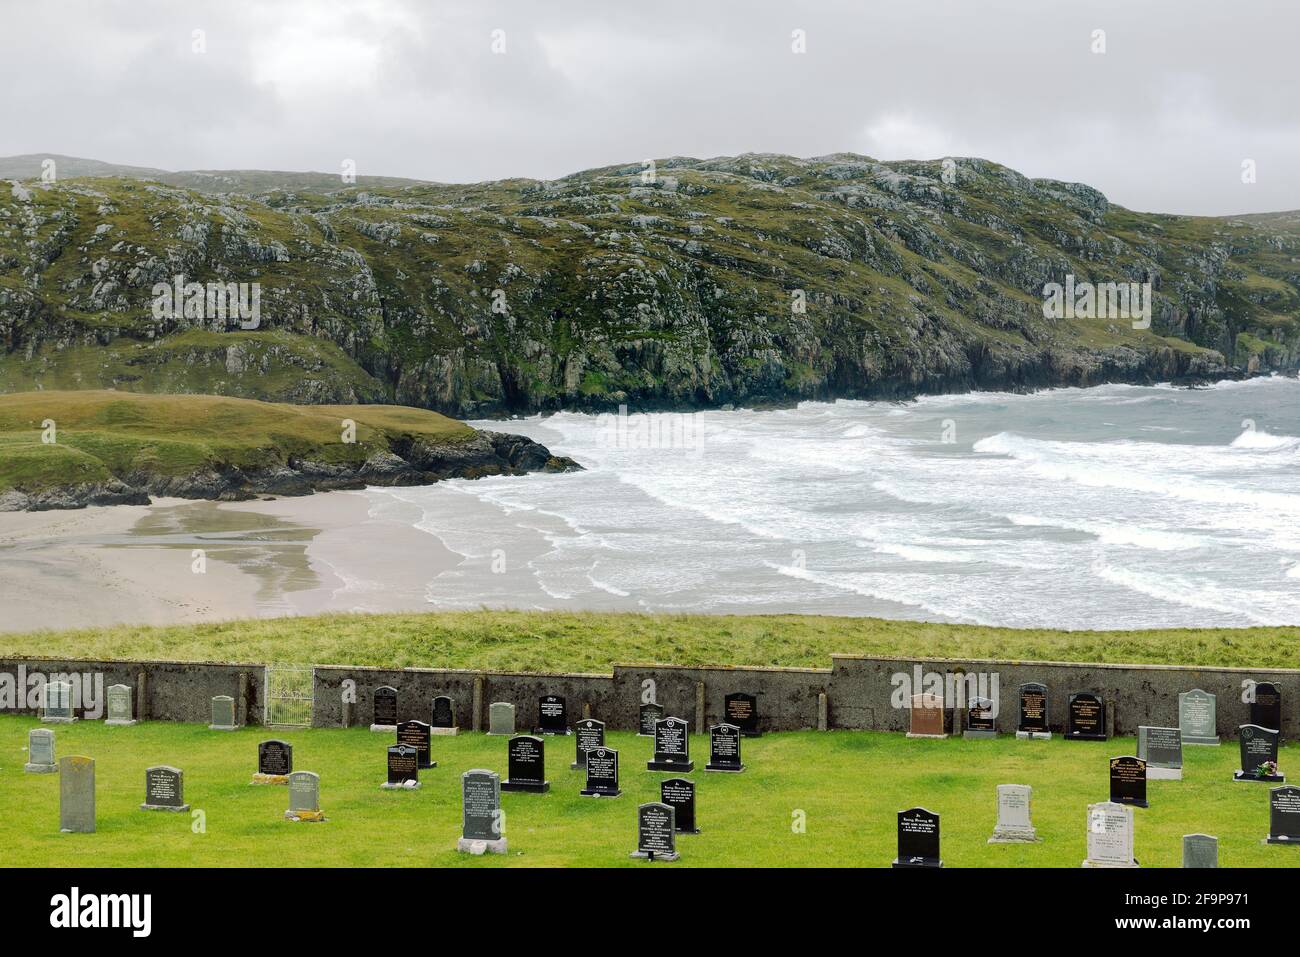 New burial ground dating from 1960s at the village of Valtos aka Bhaltos in western Lewis, Outer Hebrides, Scotland. Looking west over Cliff Beach Stock Photo